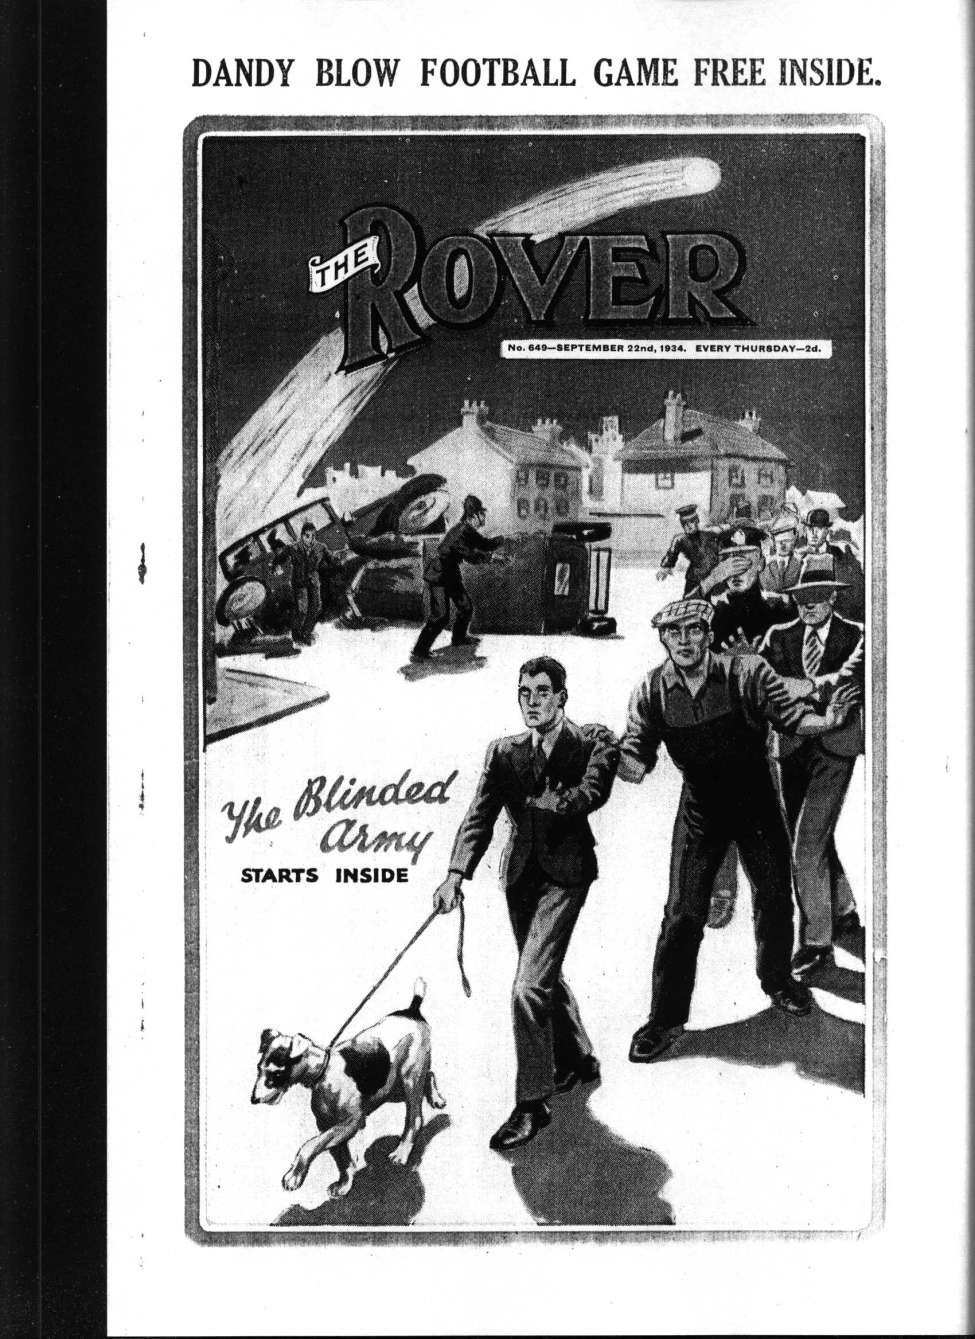 Book Cover For The Rover 649